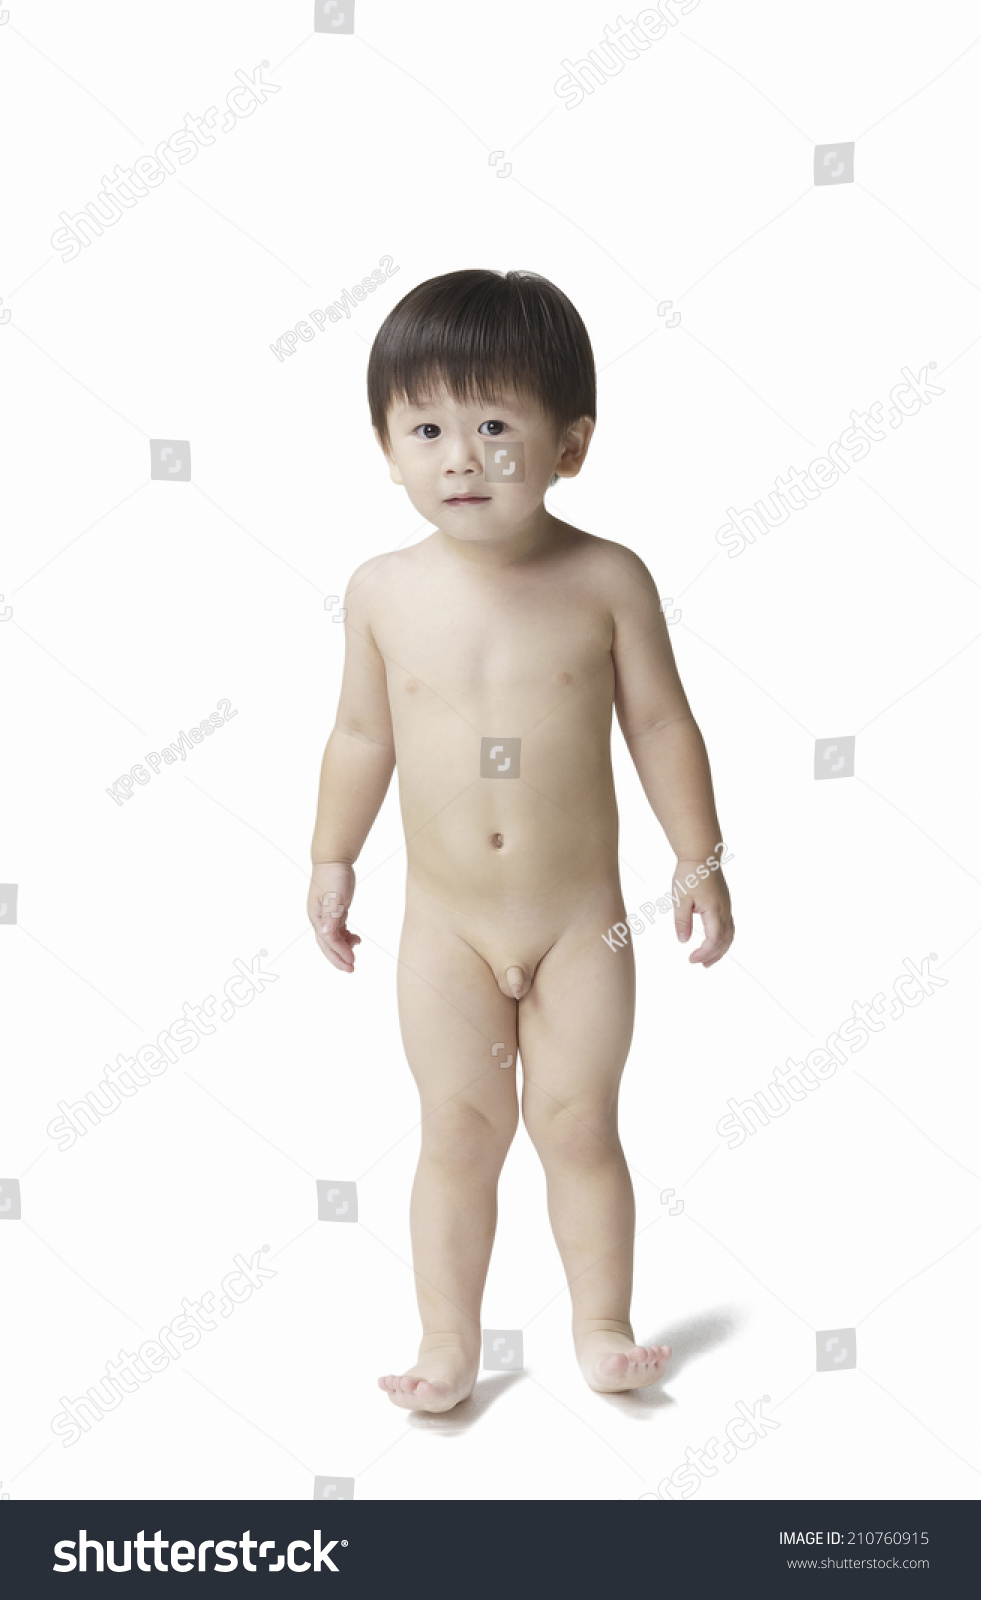 A Naked Baby 45